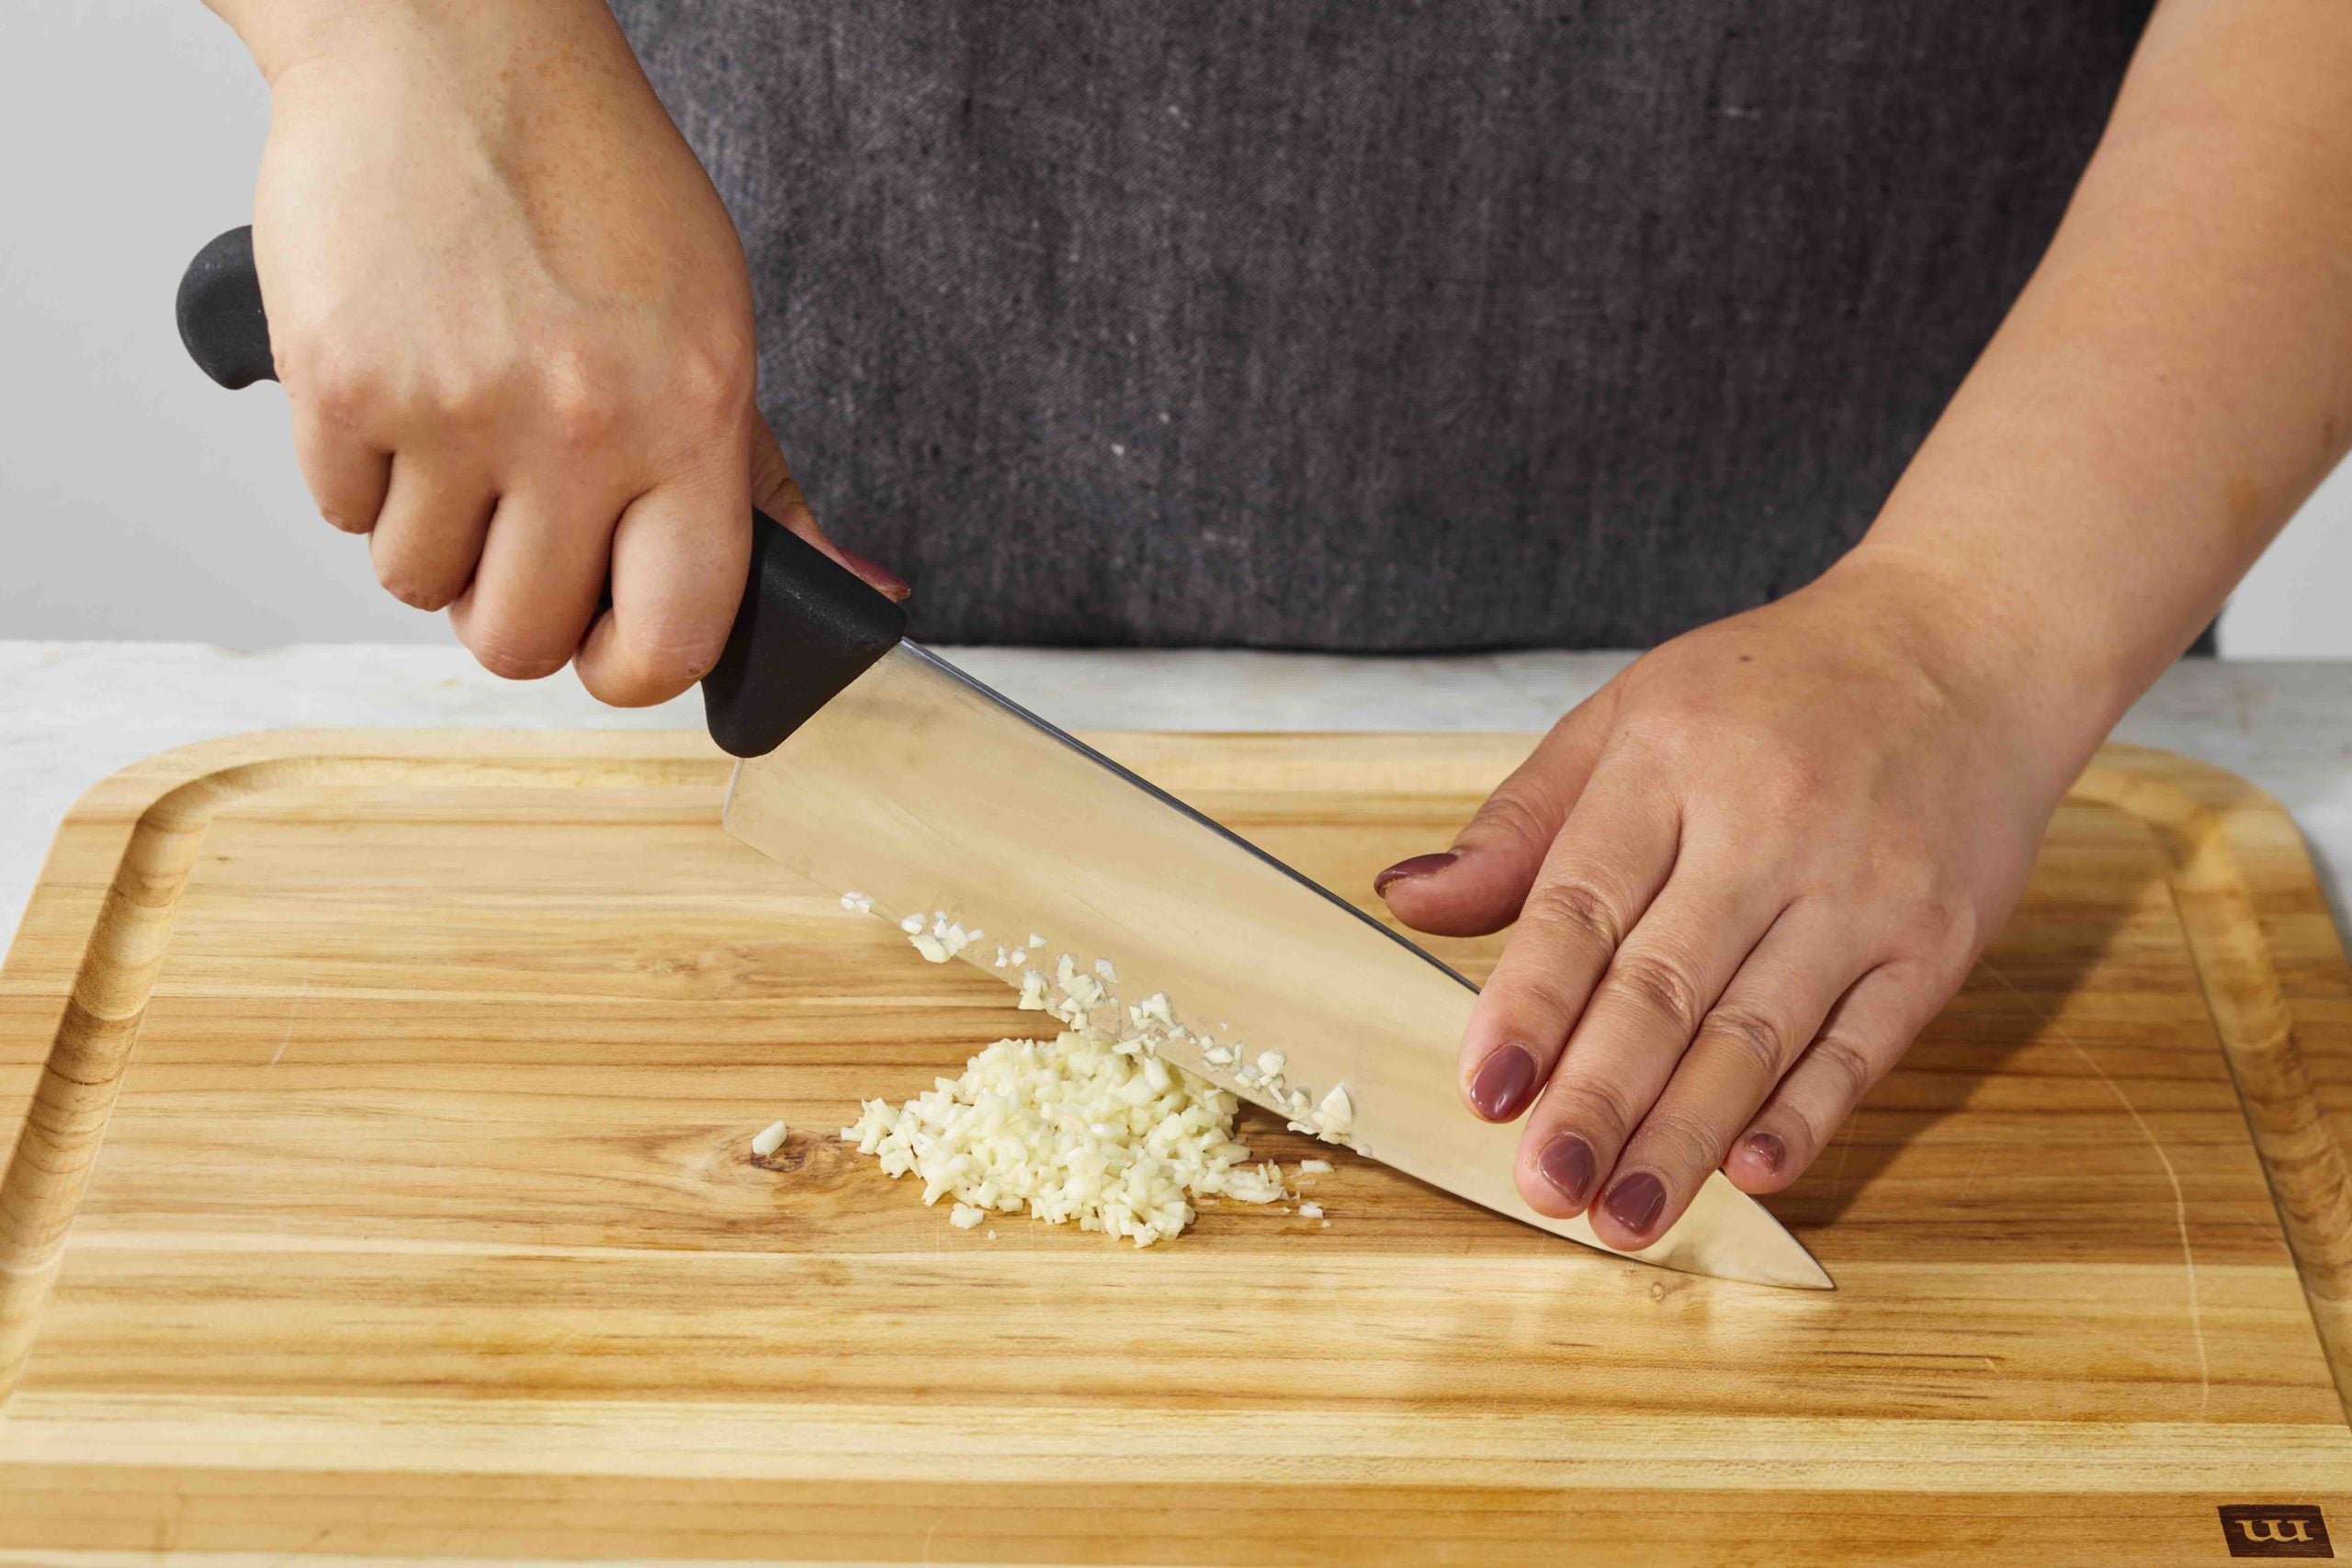 knife-skills-for-beginners-a-visual-guide-to-slicing-dicing-and-more